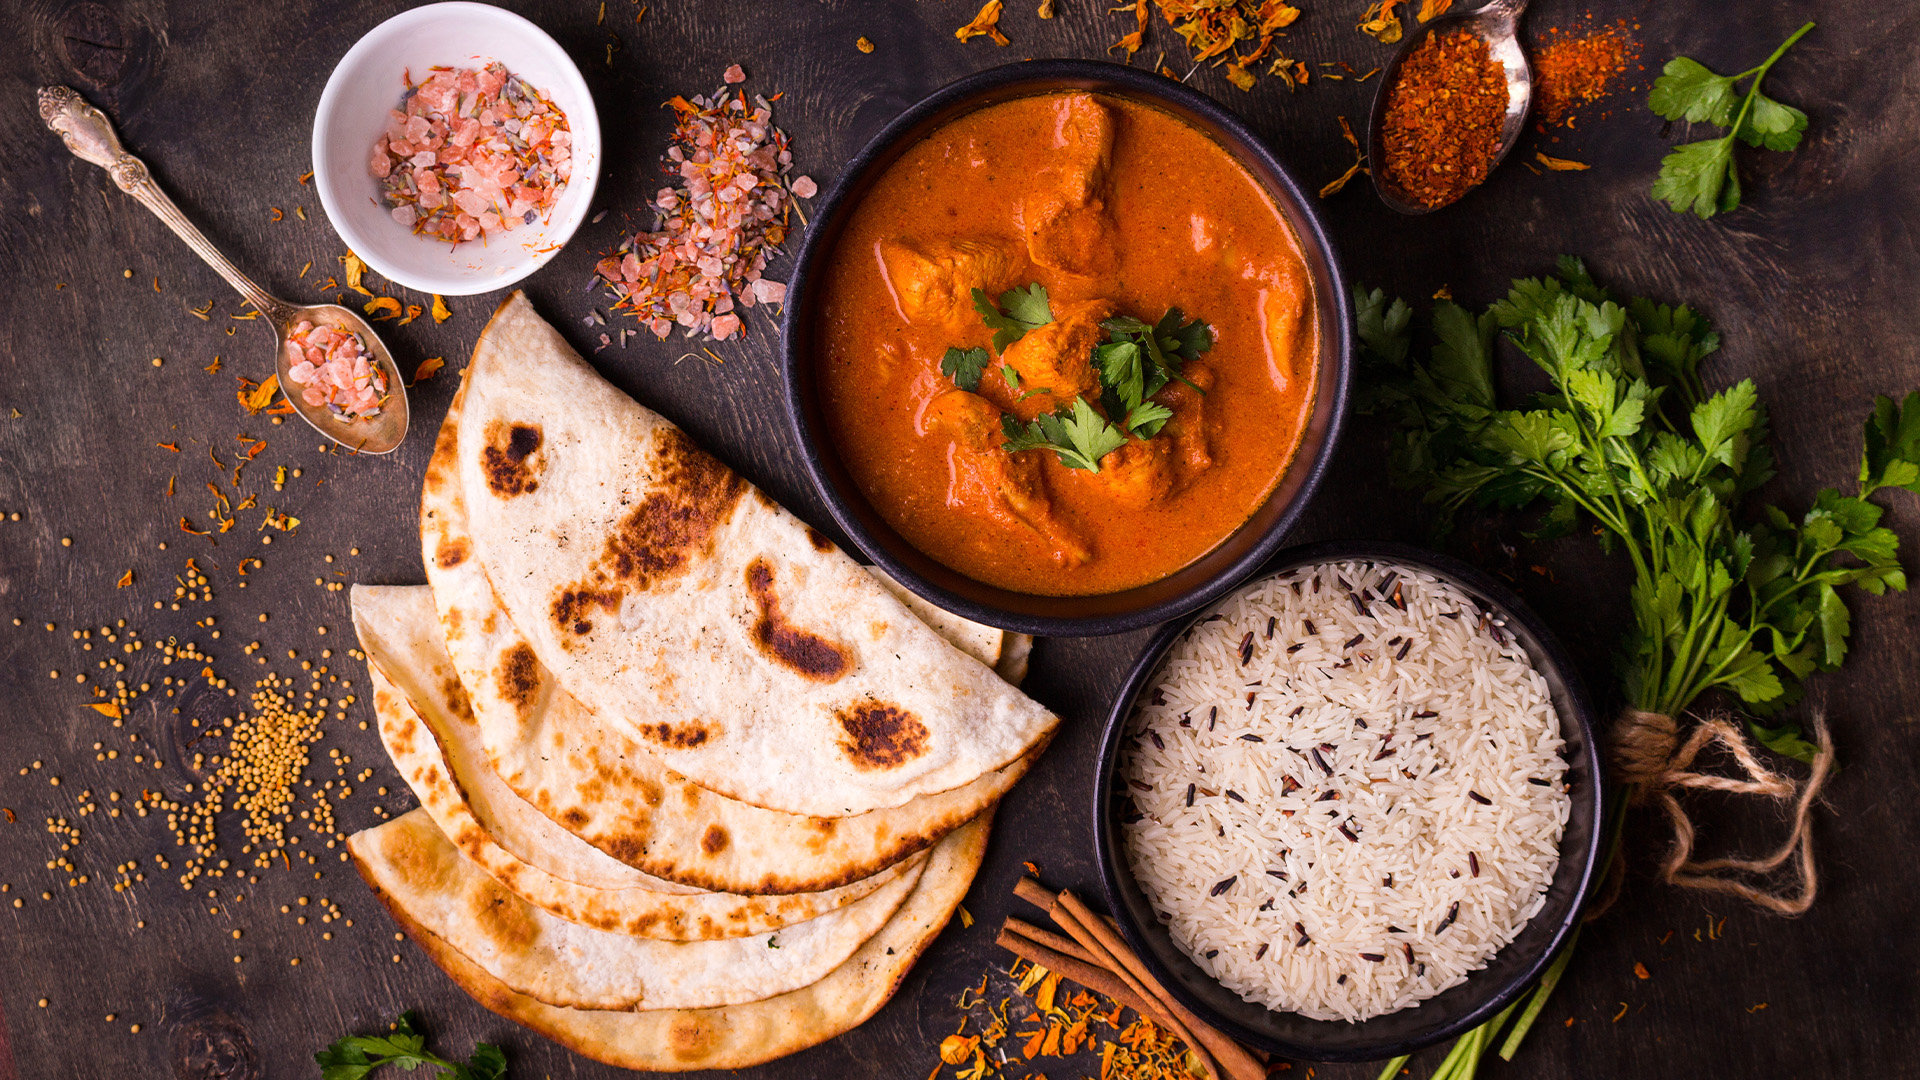 Sampling butter chicken in New Delhi is a must-do during a culinary exploration of India's Golden Triangle – Luxury Escapes